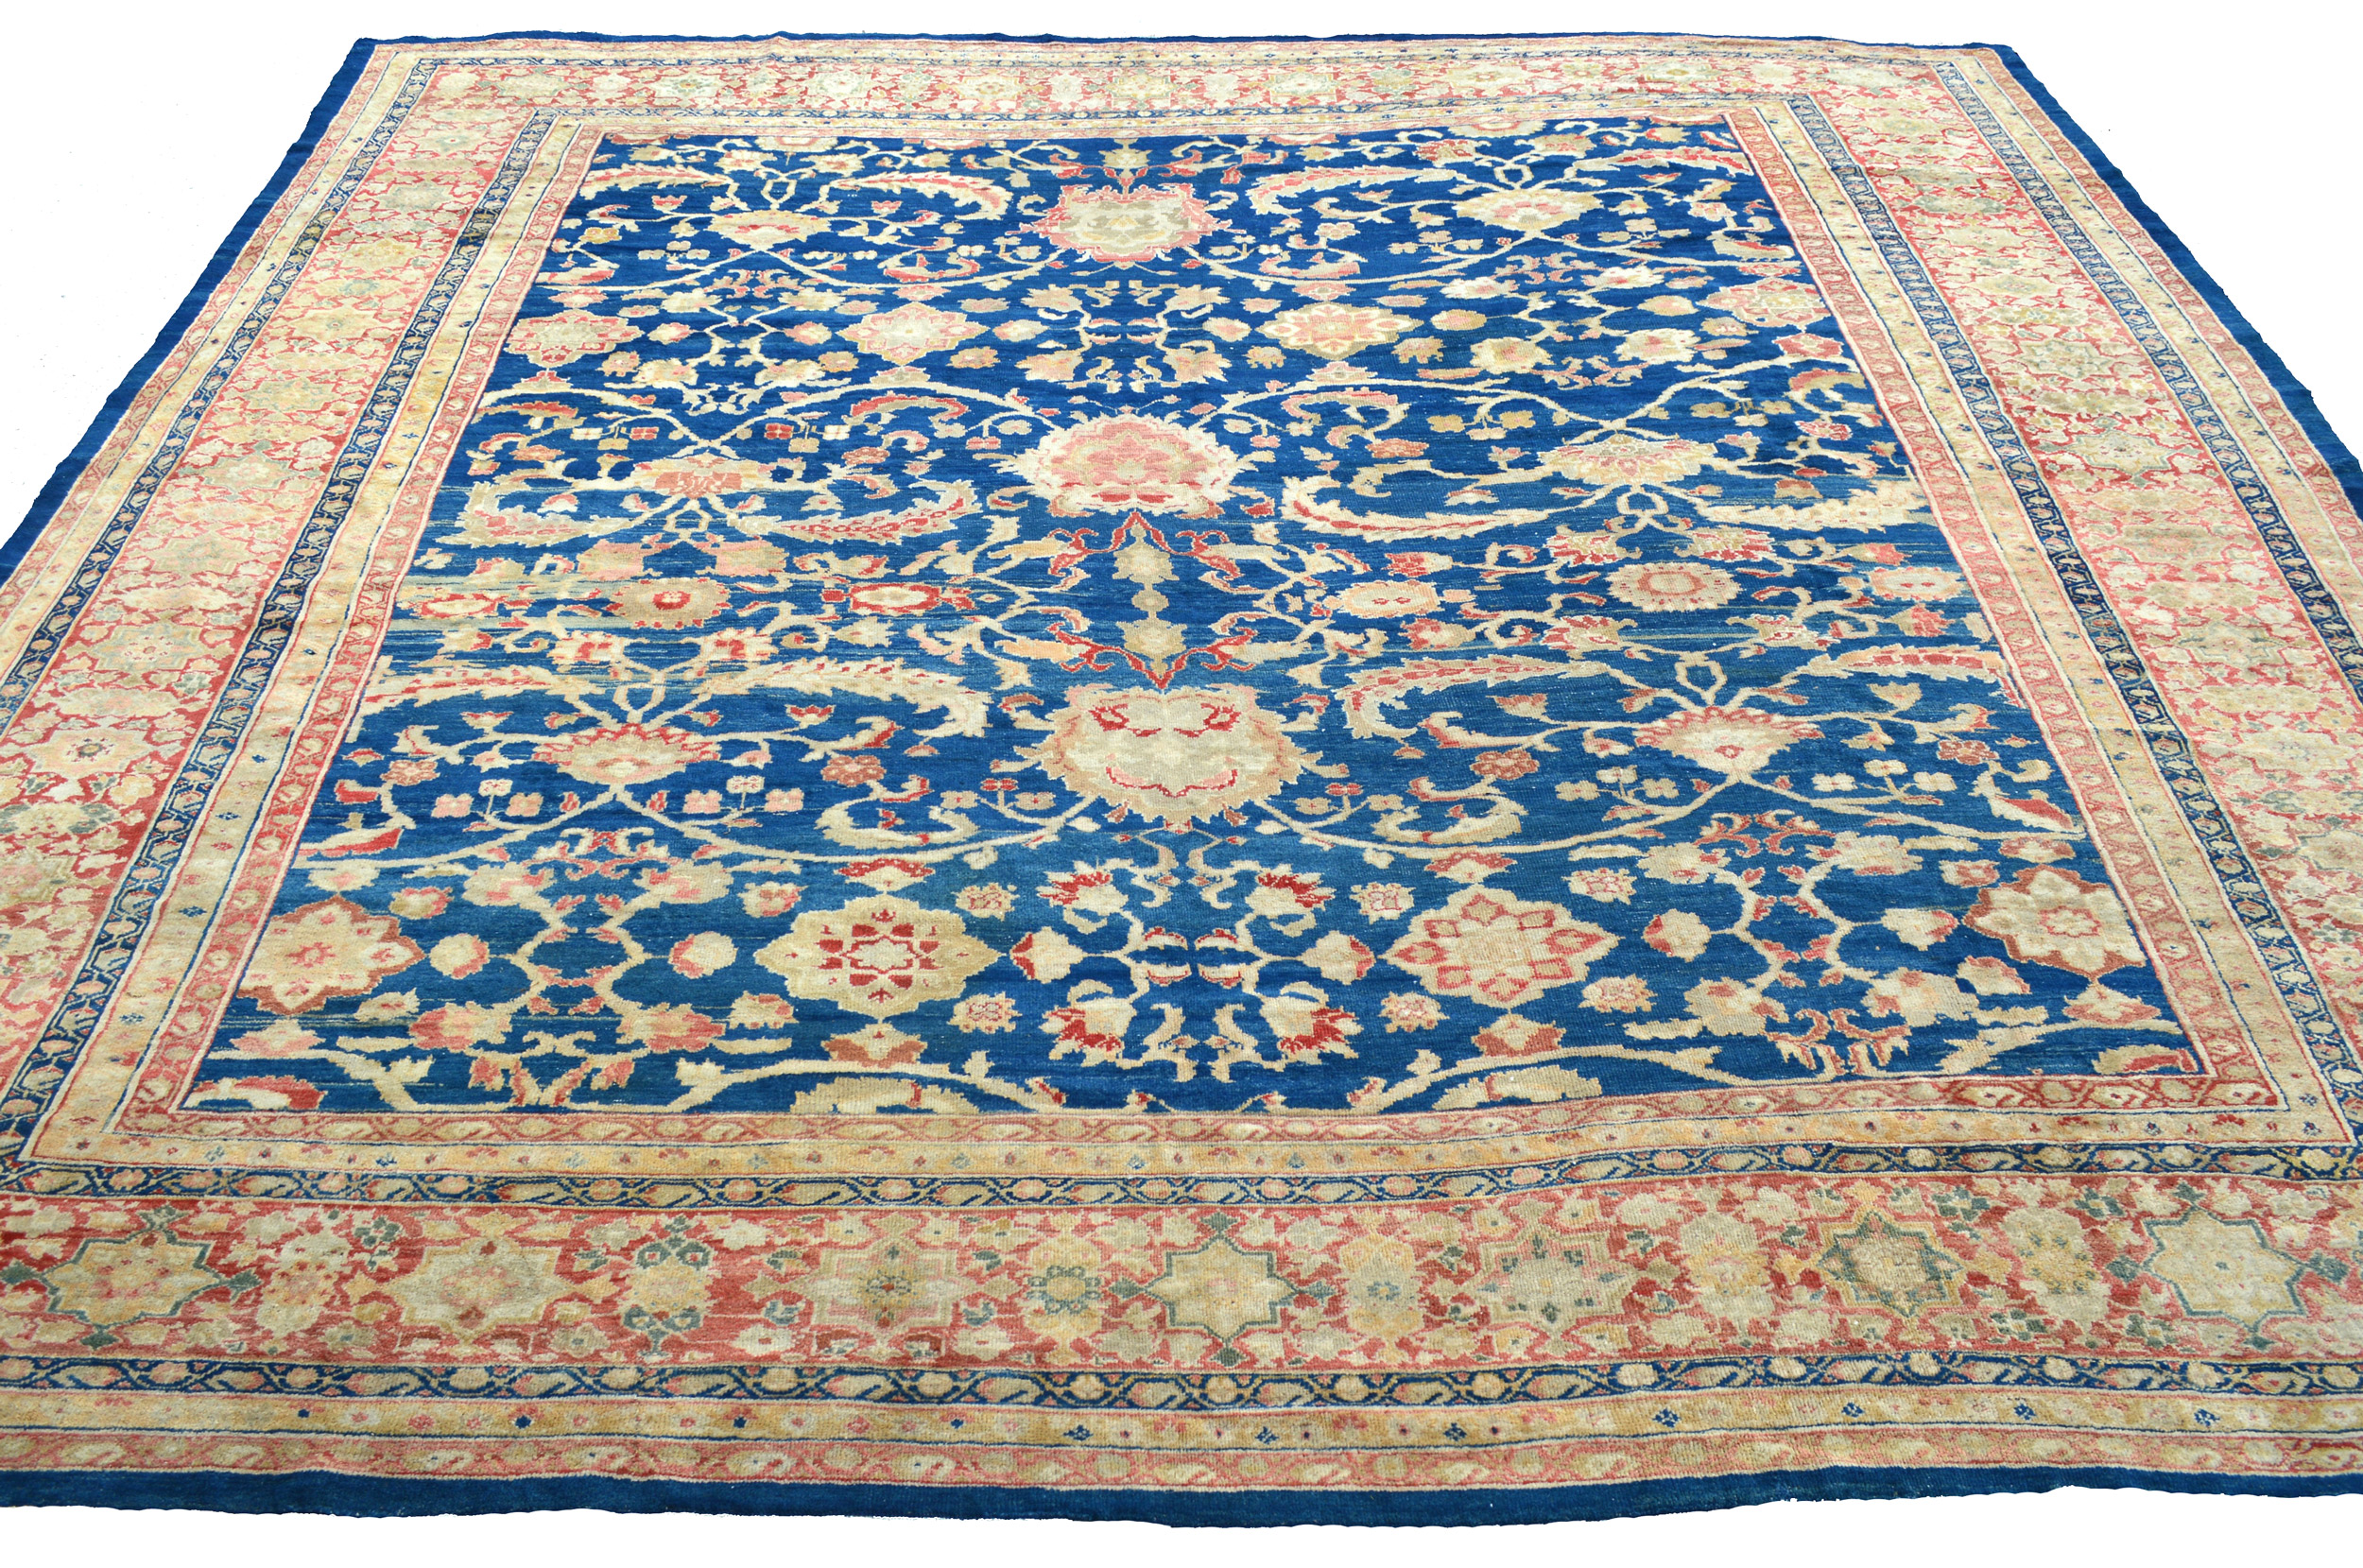 Antique Persian Sultanabad carpet with denim blue field and all-over palmetto design, probably commissioned by the Anglo-Swiss firm Ziegler & Co., central Persia, circa 1890 - Douglas Stock Gallery antique Persian carpets, Boston,MA area, New England